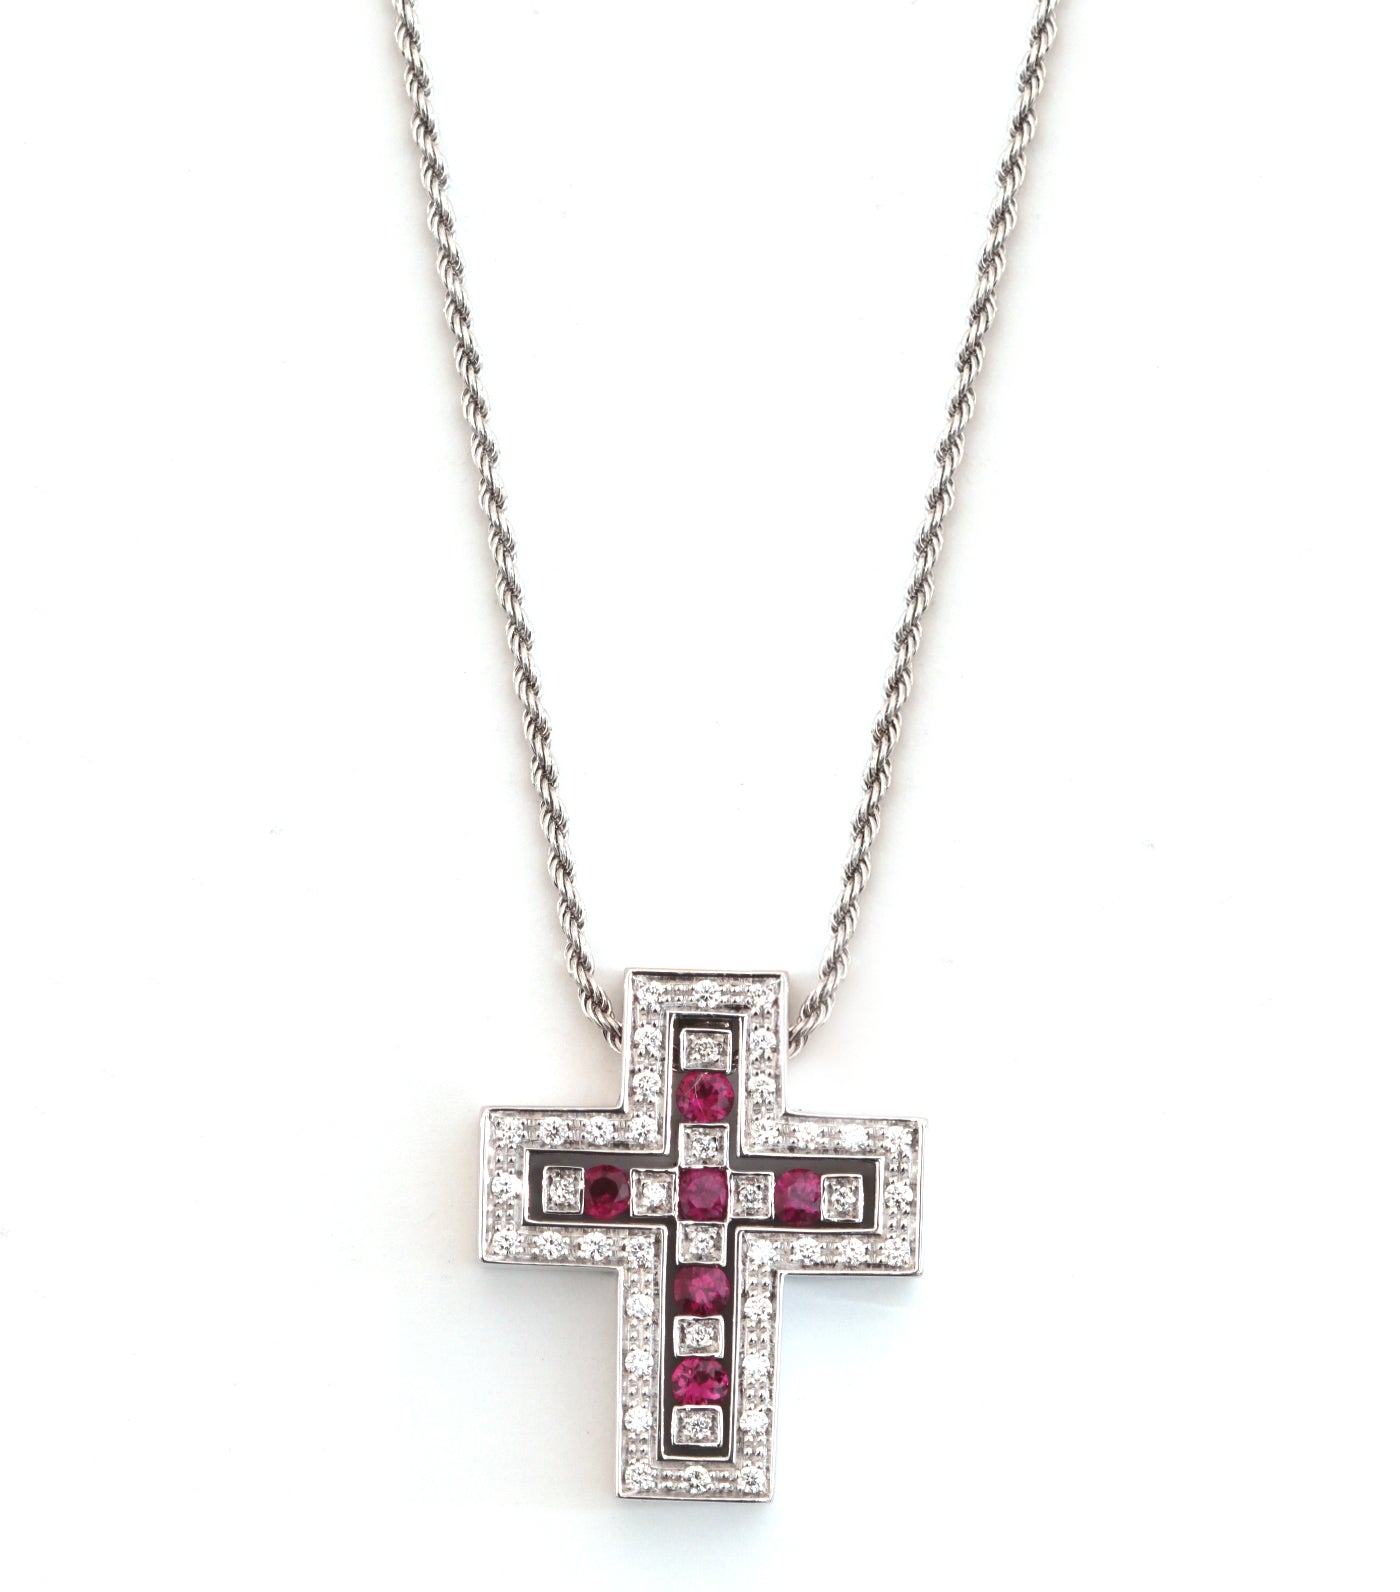 Belle Belle Epoque 18K White Gold, Diamonds, and Rubies Cross Necklace